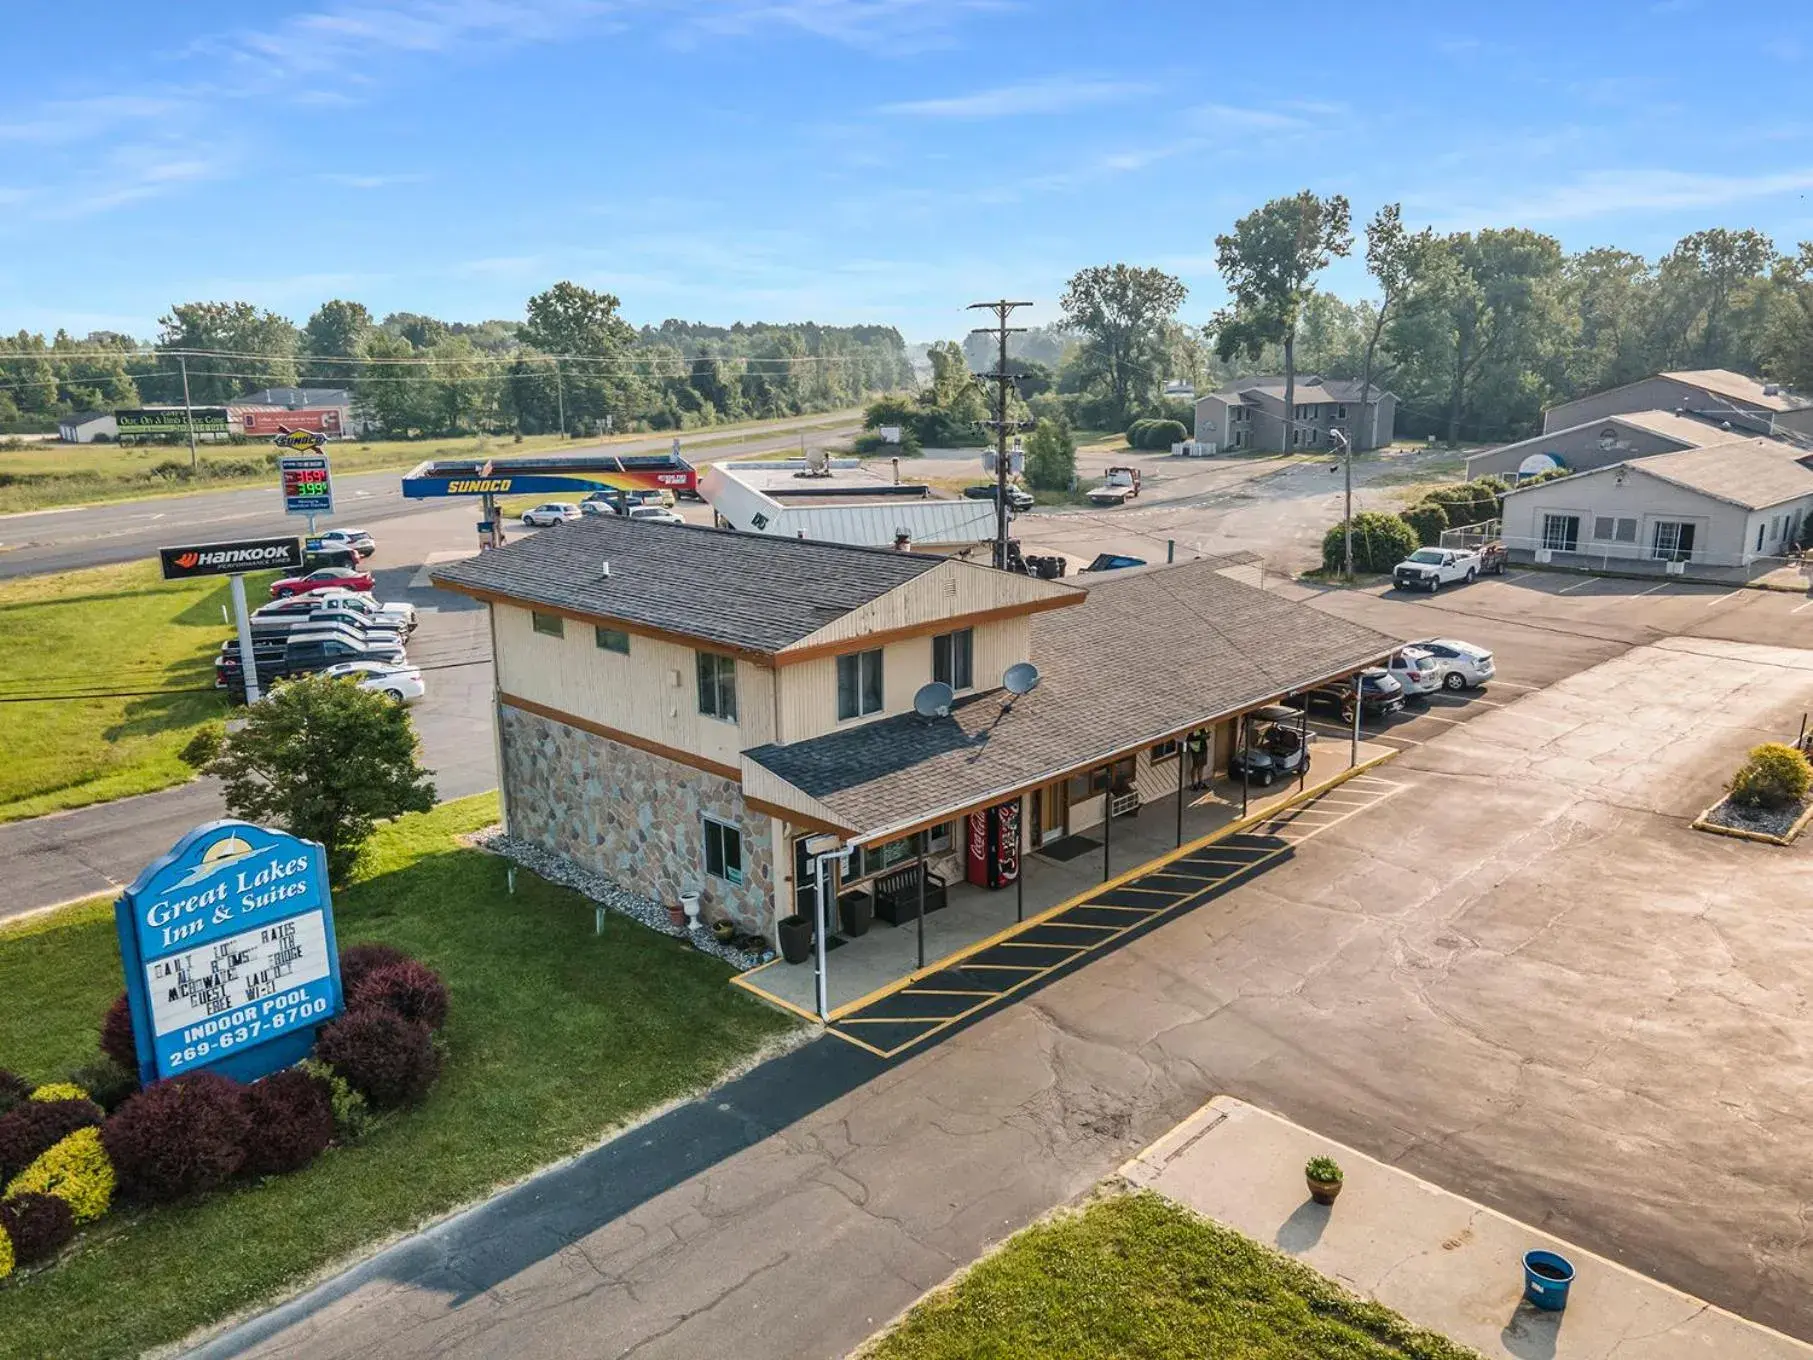 Property building in Great Lakes Inn & Suites